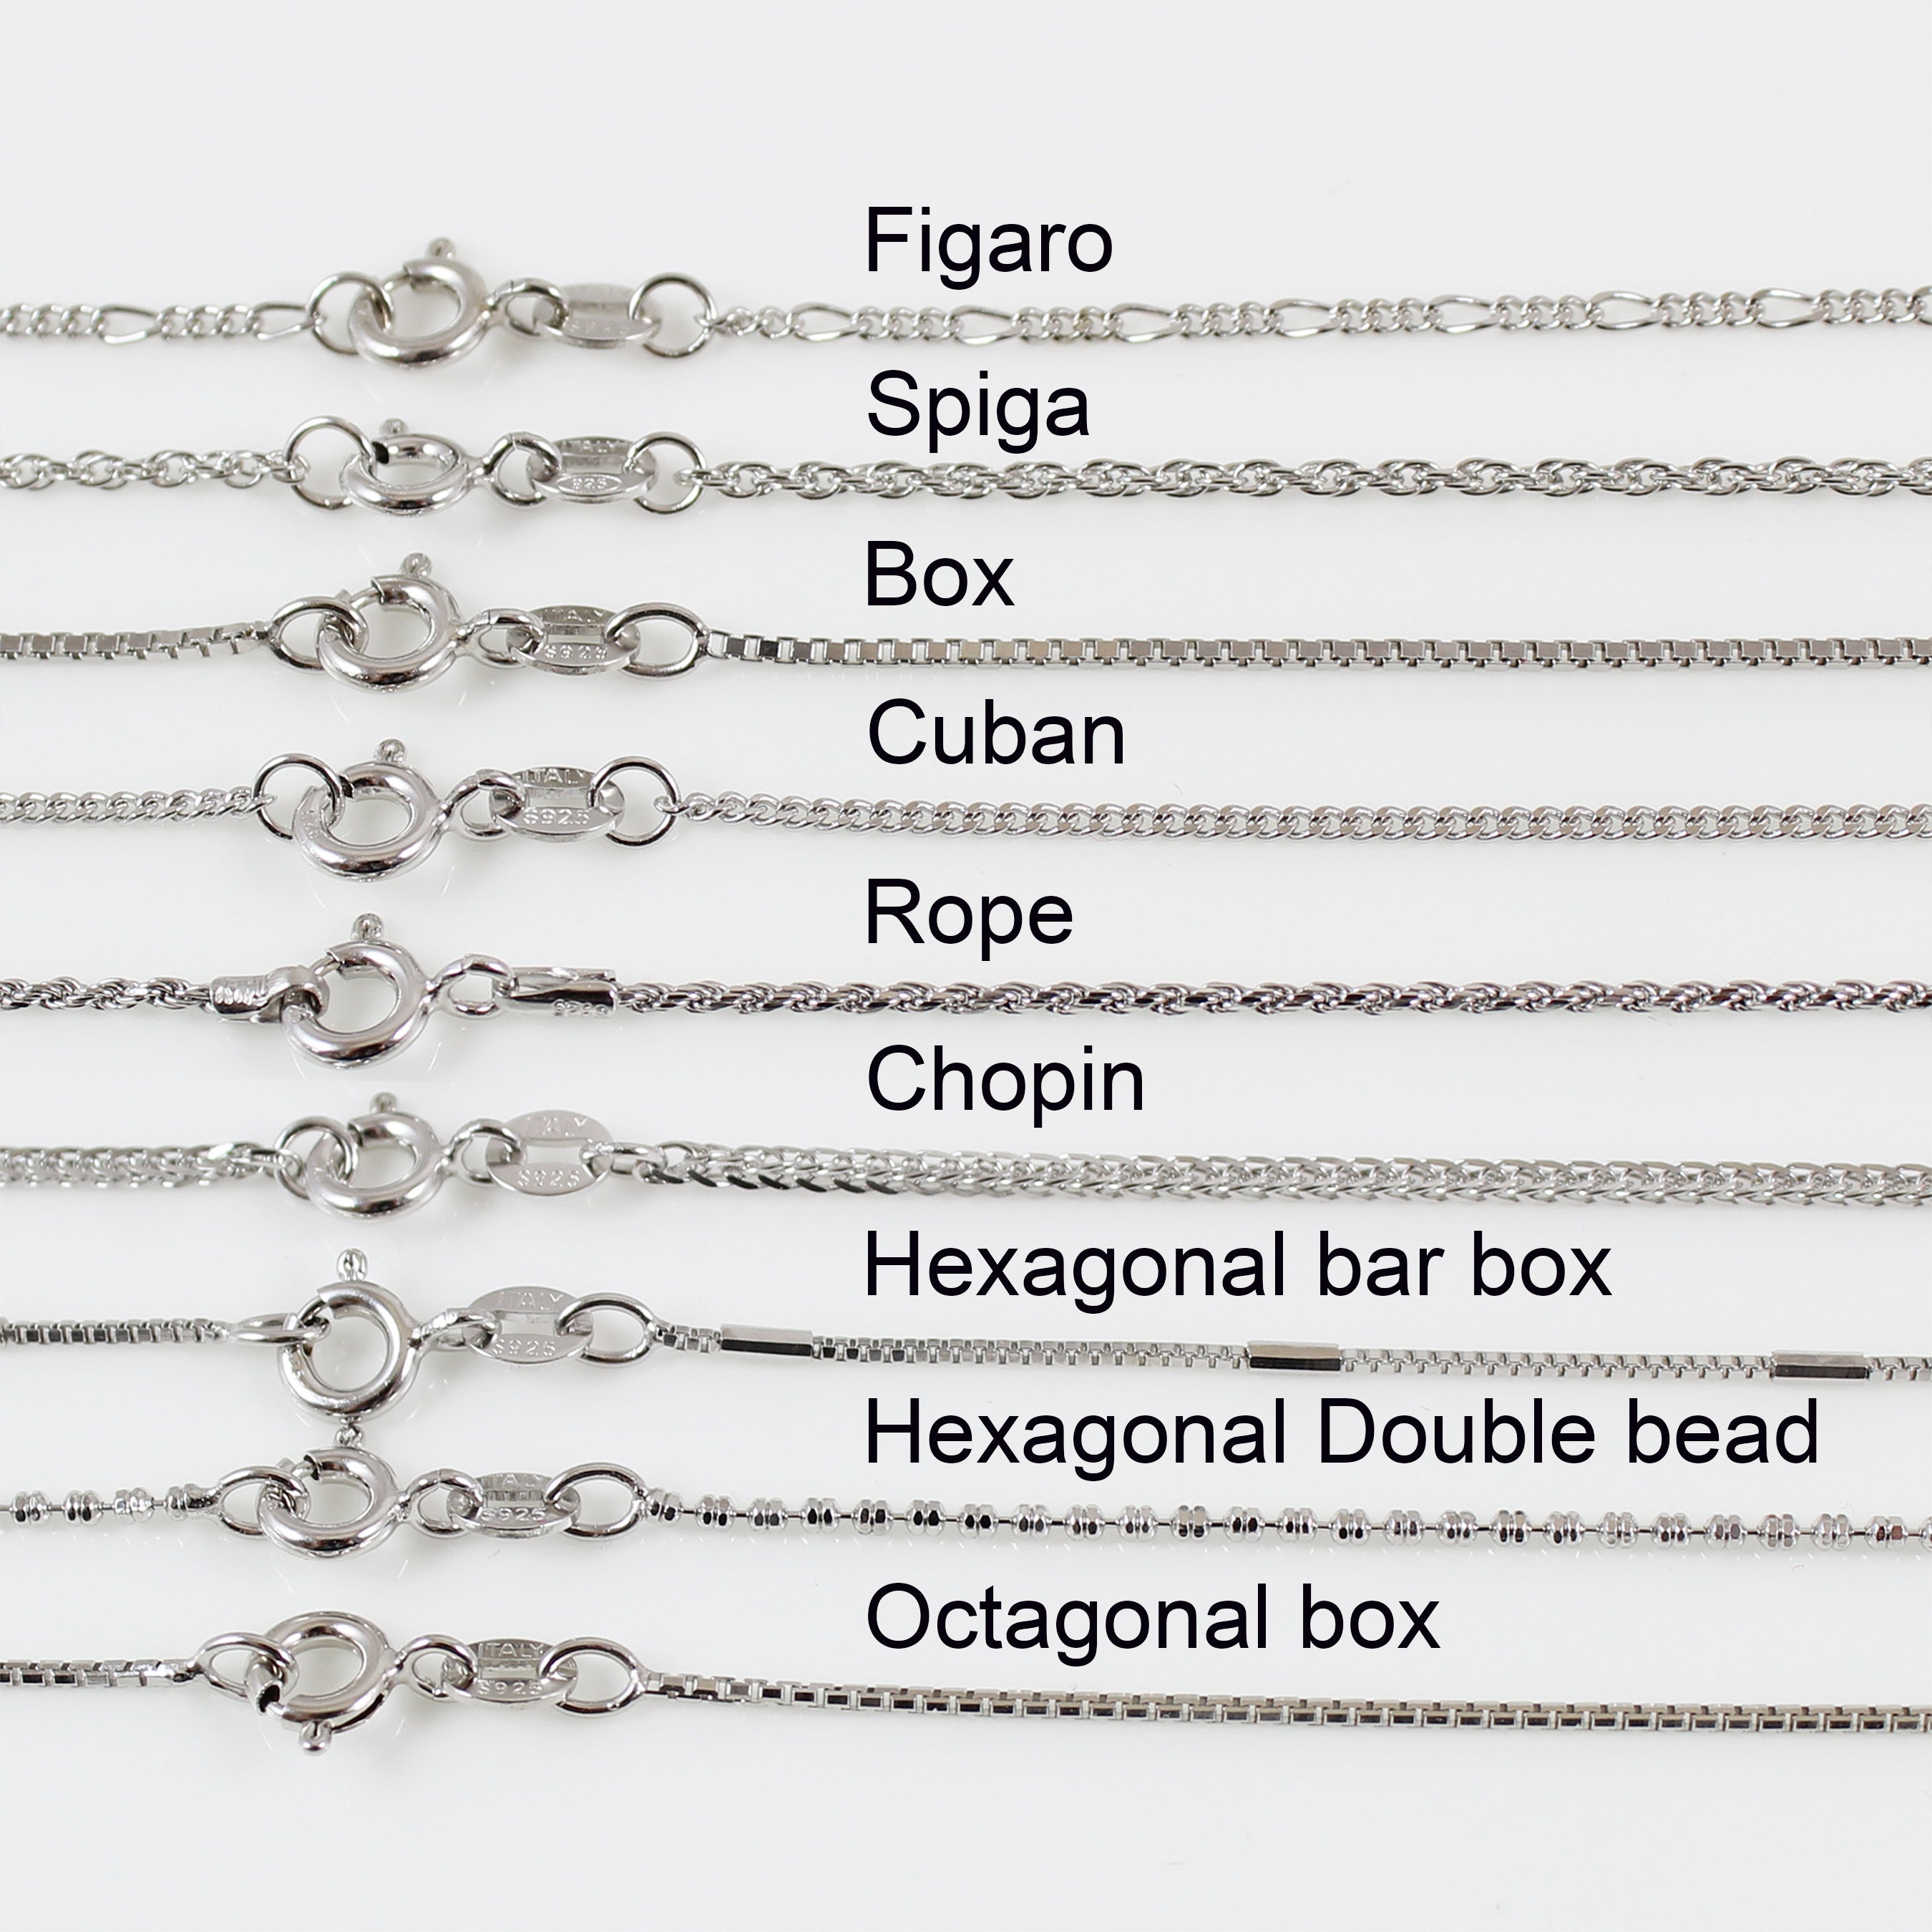 Inspired Essentials Rope Chain Loop Charm Necklace - 24  Fine jewelry  solid silver gold-finish necklaces bracelets earrings